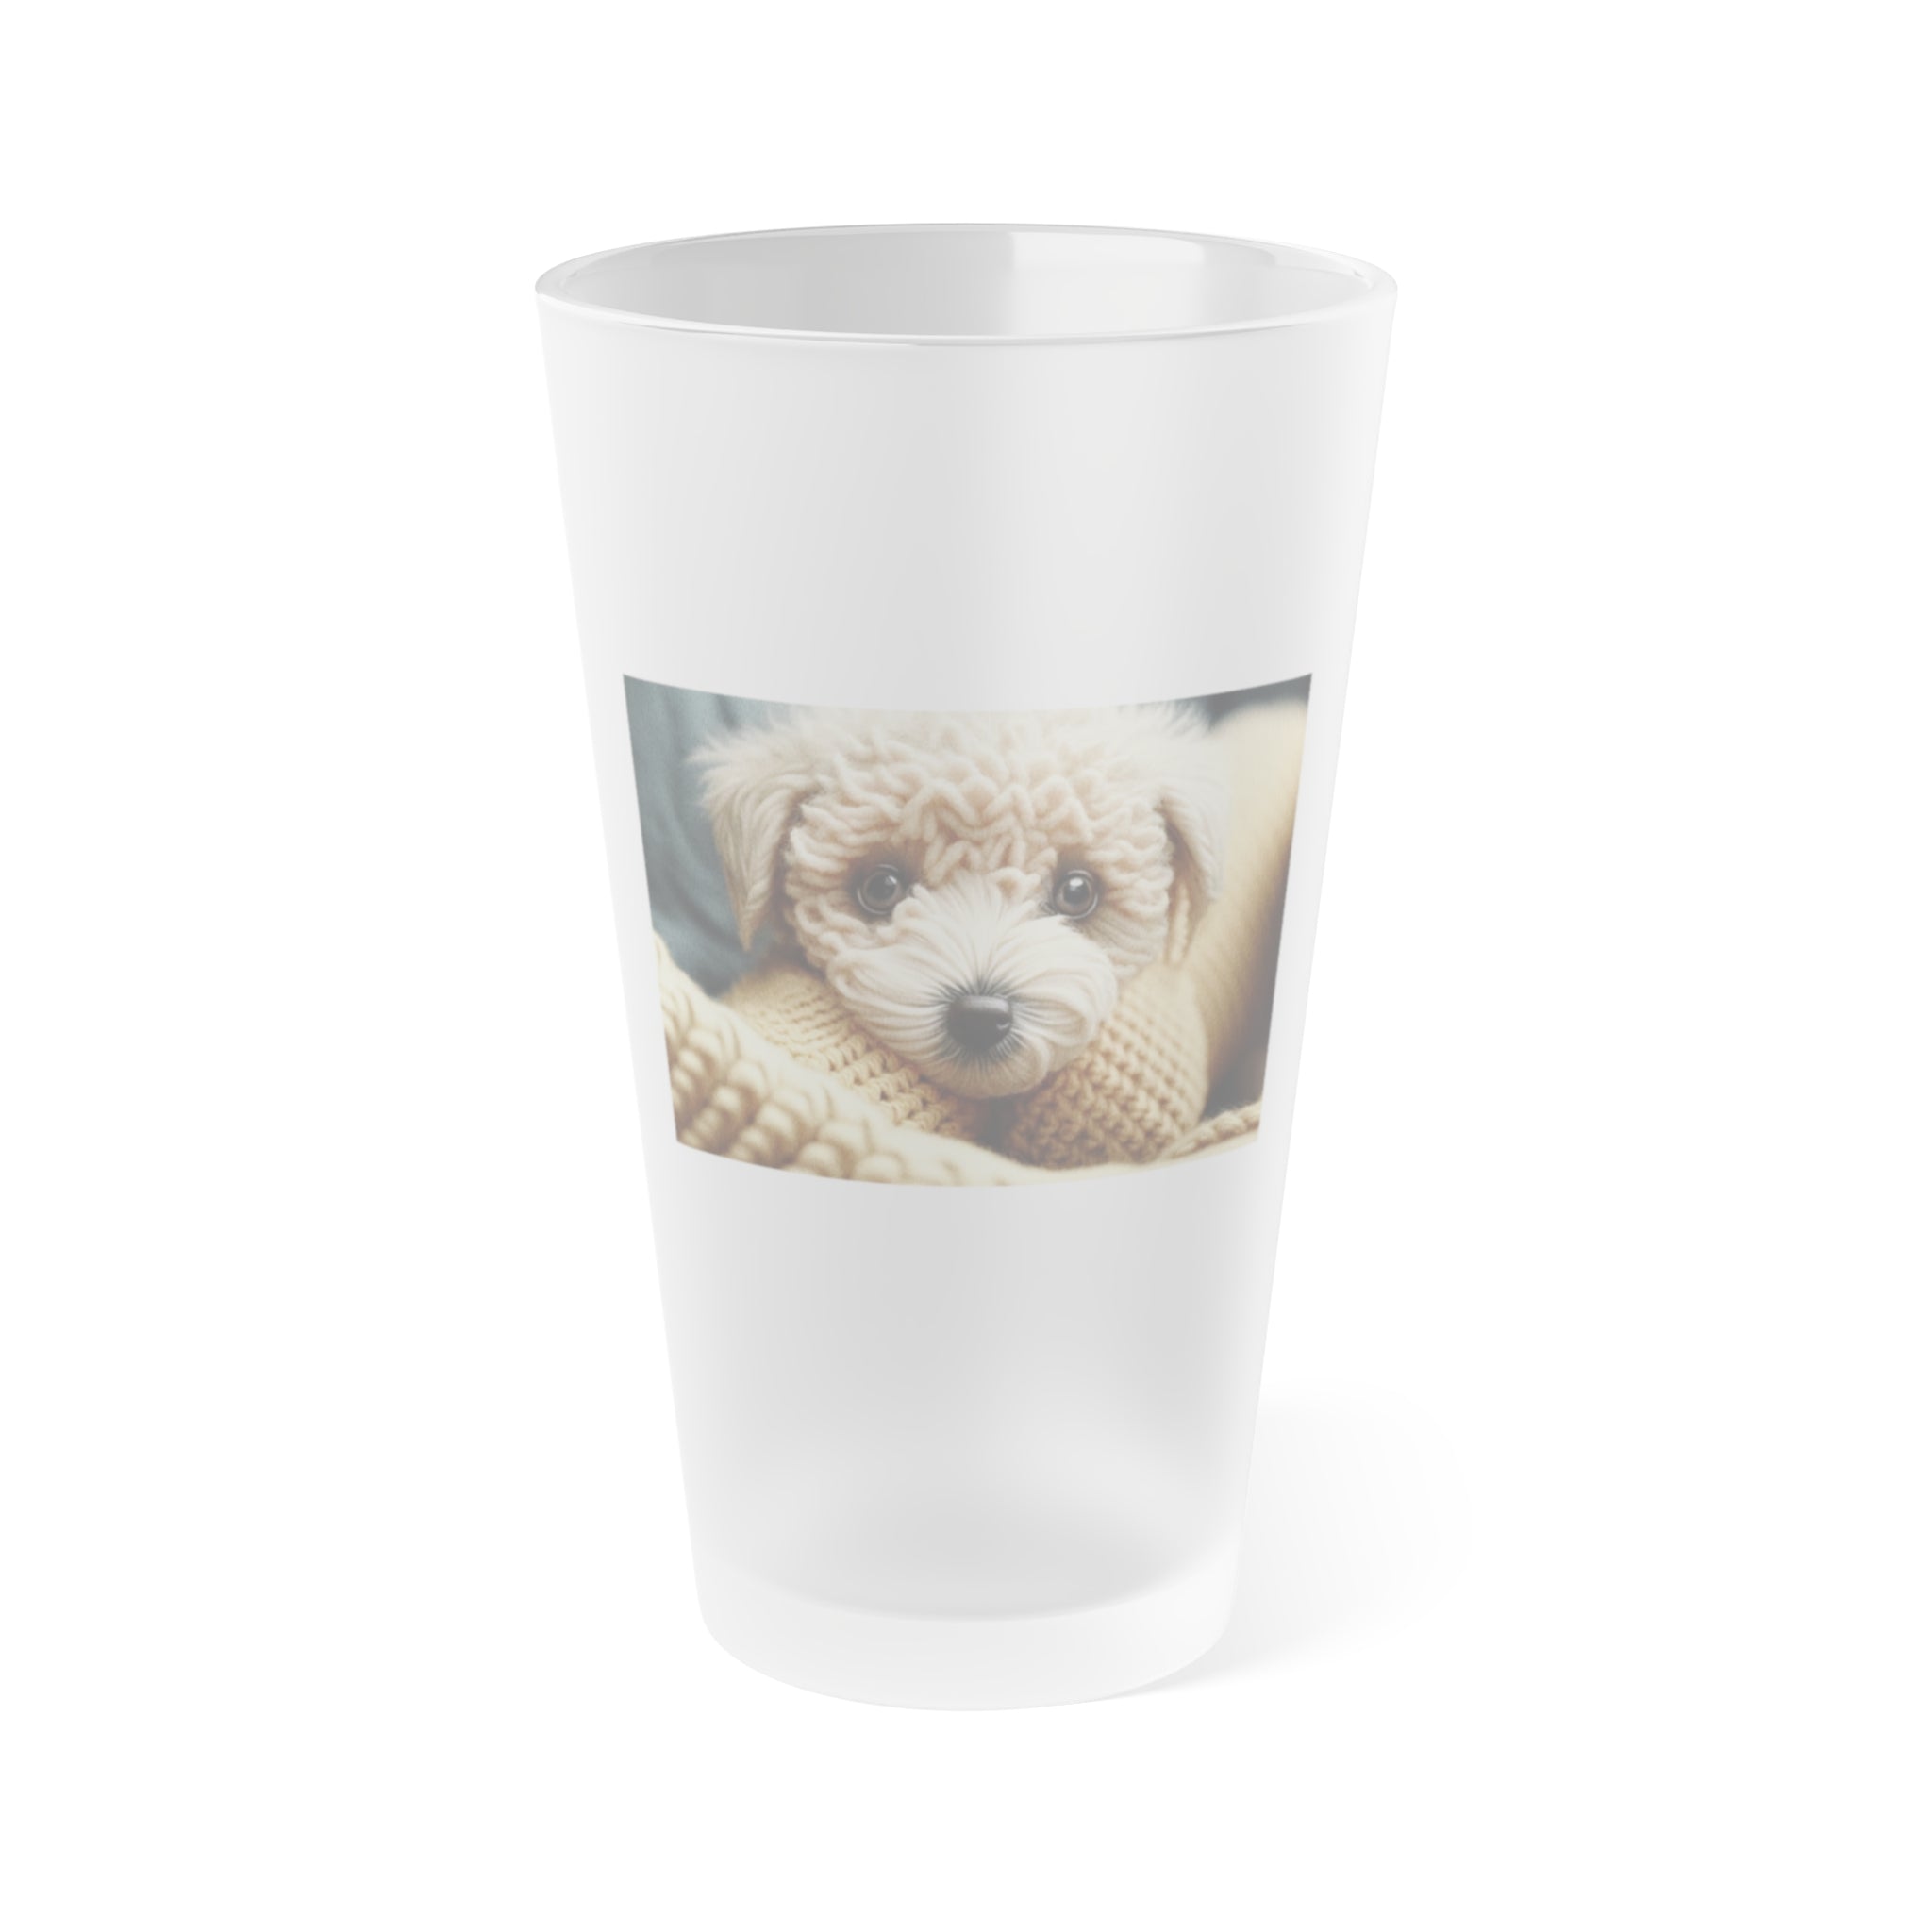 Frosted Pint Glass, 16oz - Animal Knit Arts, Dog pup